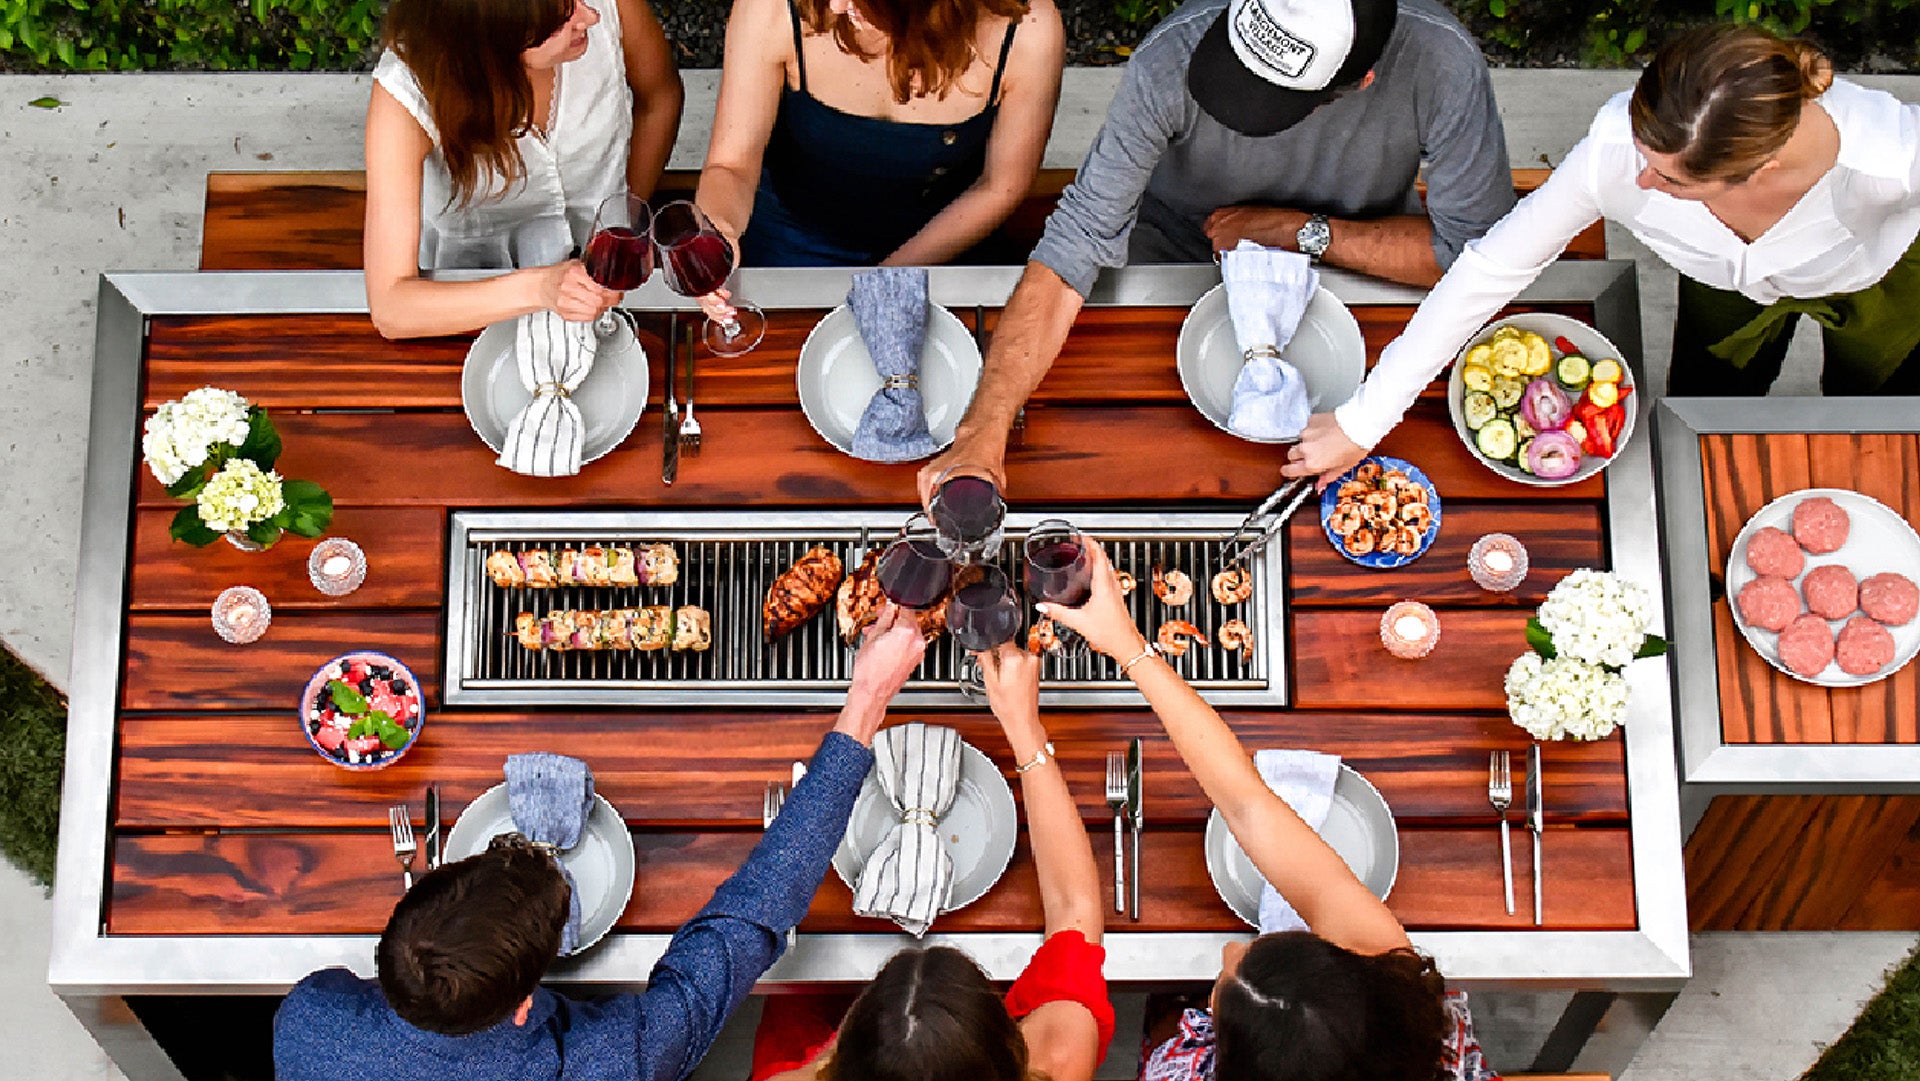 Fire Up the Grill for an Outdoor Brunch Party This Summer